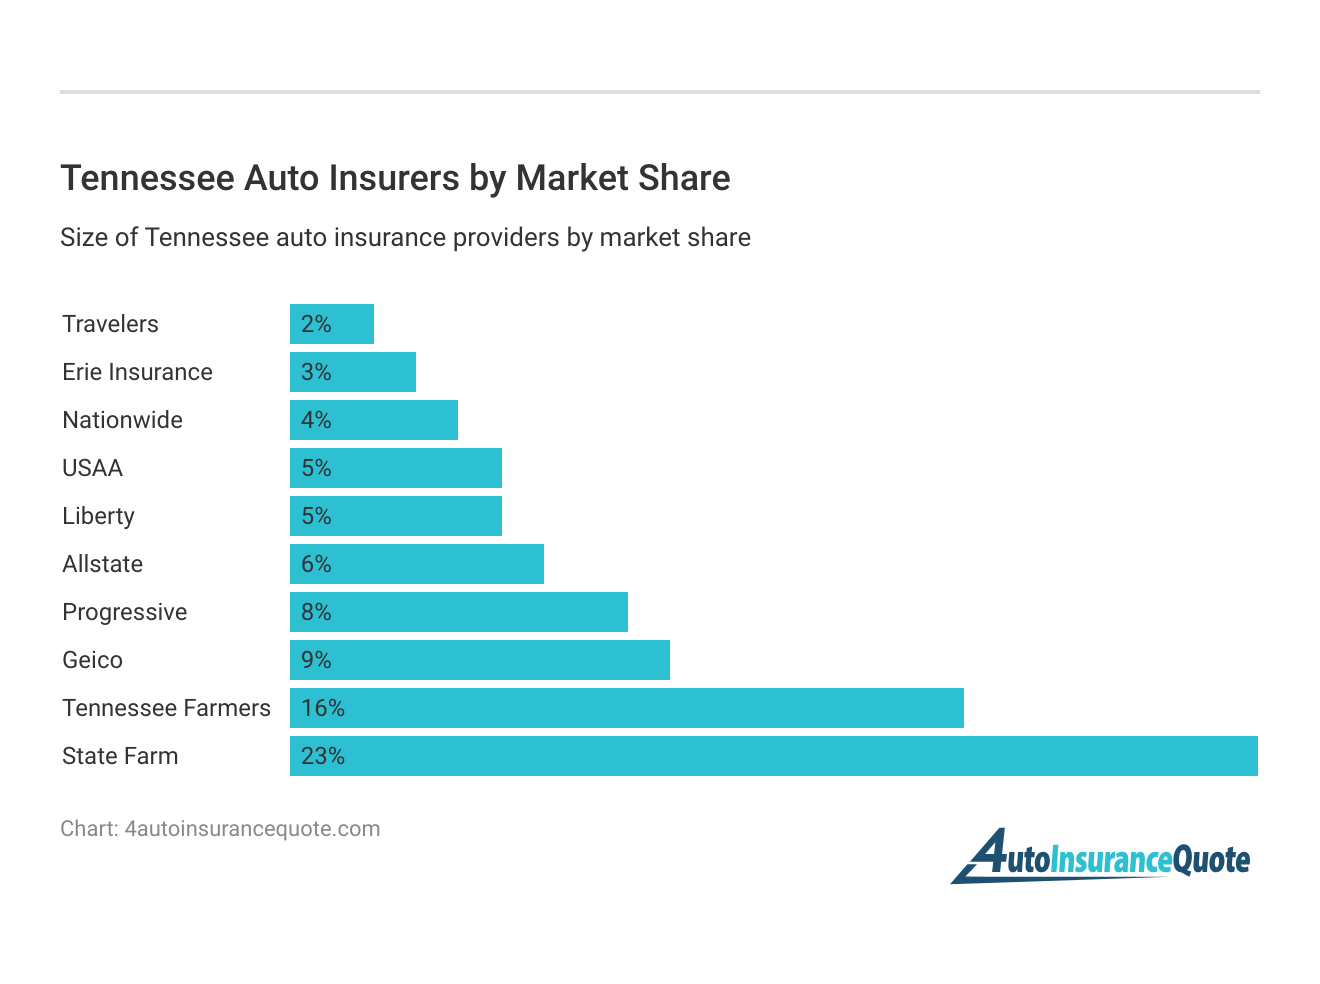 <h3>Tennessee Auto Insurers by Market Share</h3>